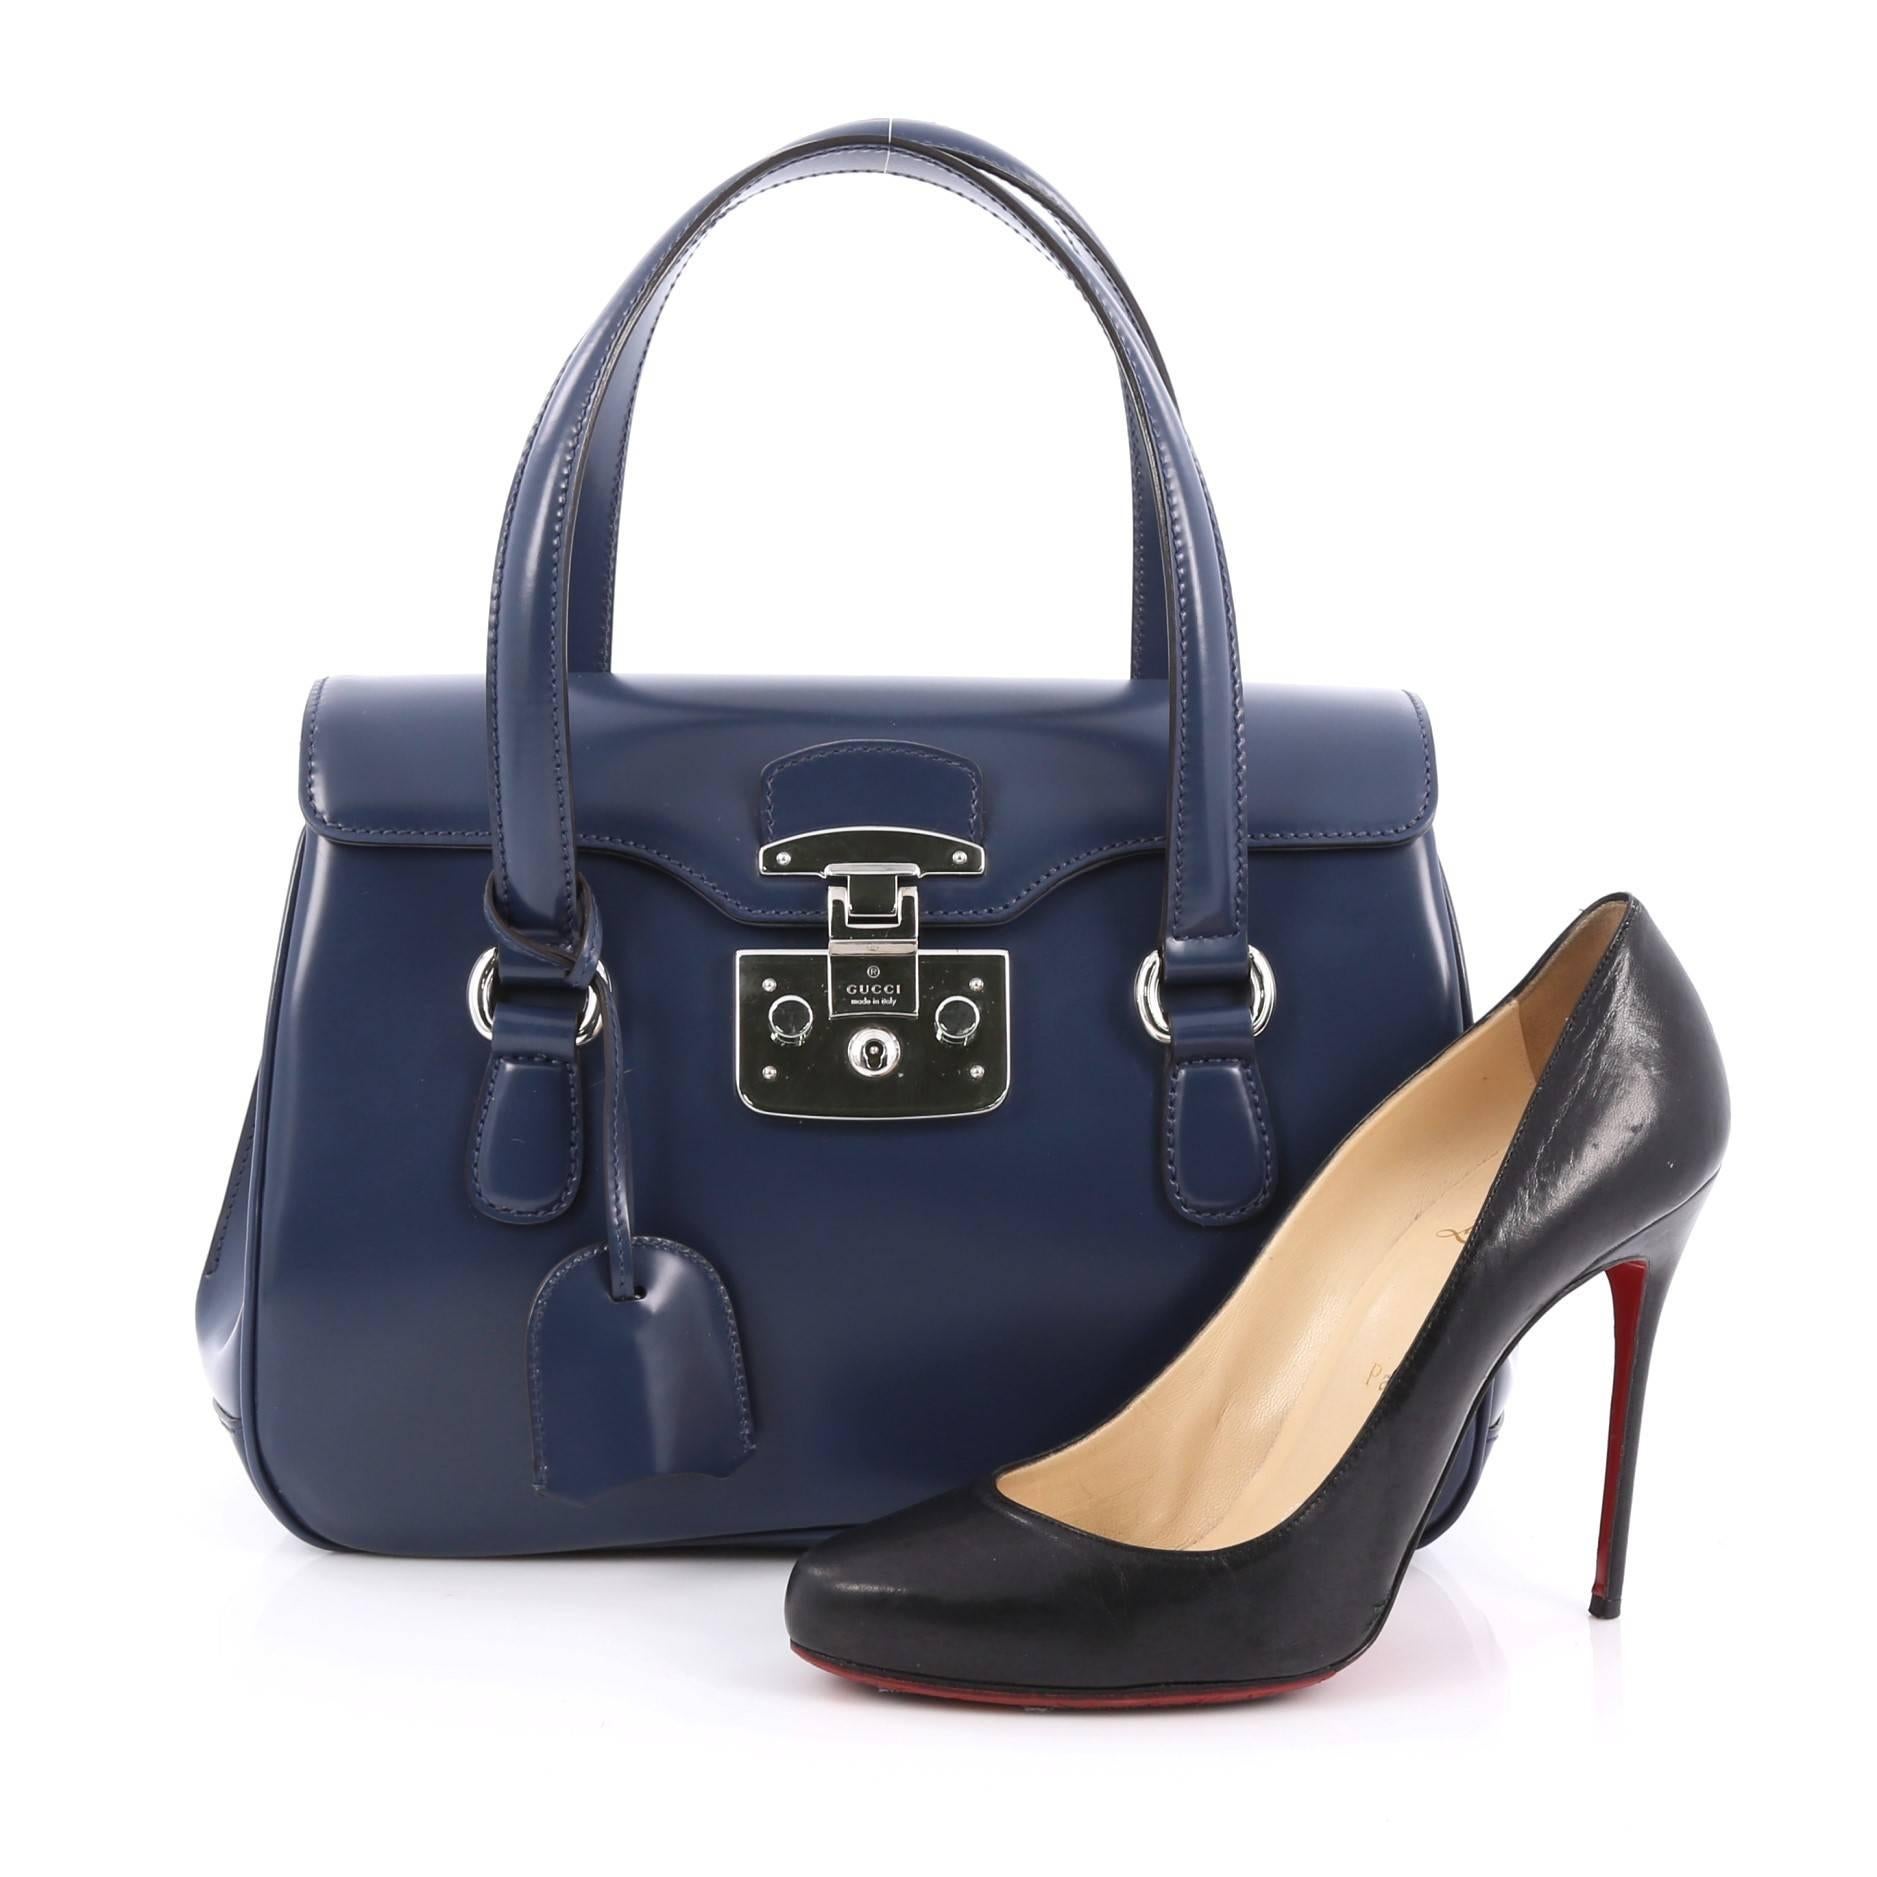 This authentic Gucci Lady Lock Satchel Leather Small is the perfect small accessory for work. Crafted in smooth and shiny blue leather, this satchel features dual-flat leather handles, retro-style lady lock closure, frontal flap, and silver-tone